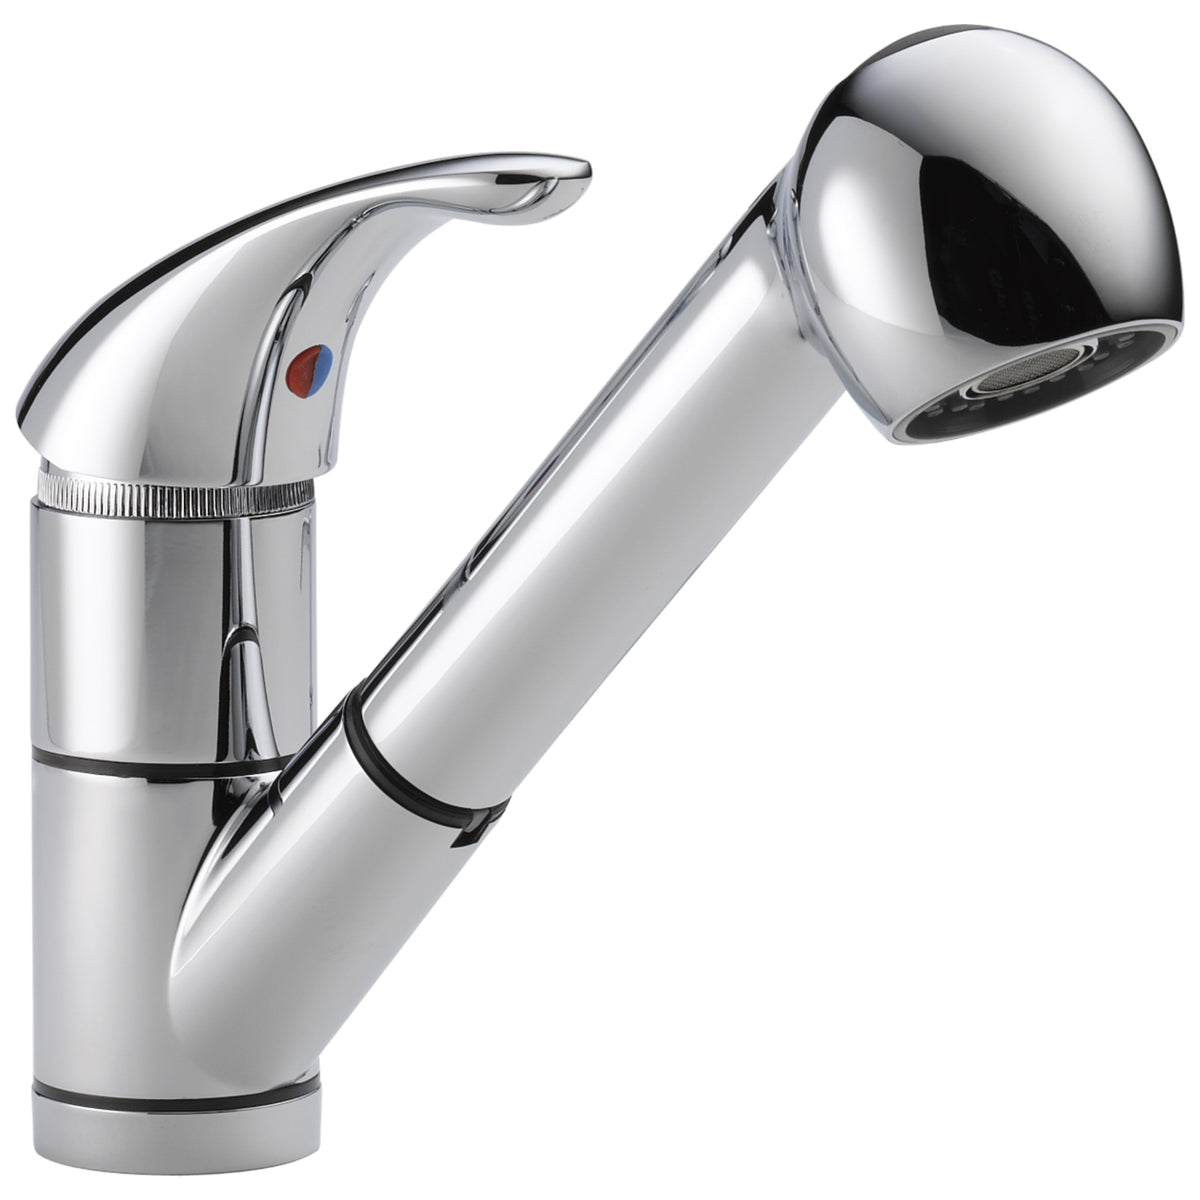 Peerless P18550LF Kitchen Pull-Out Faucet, Single Lever, Chrome Finish, 1.80 GPM